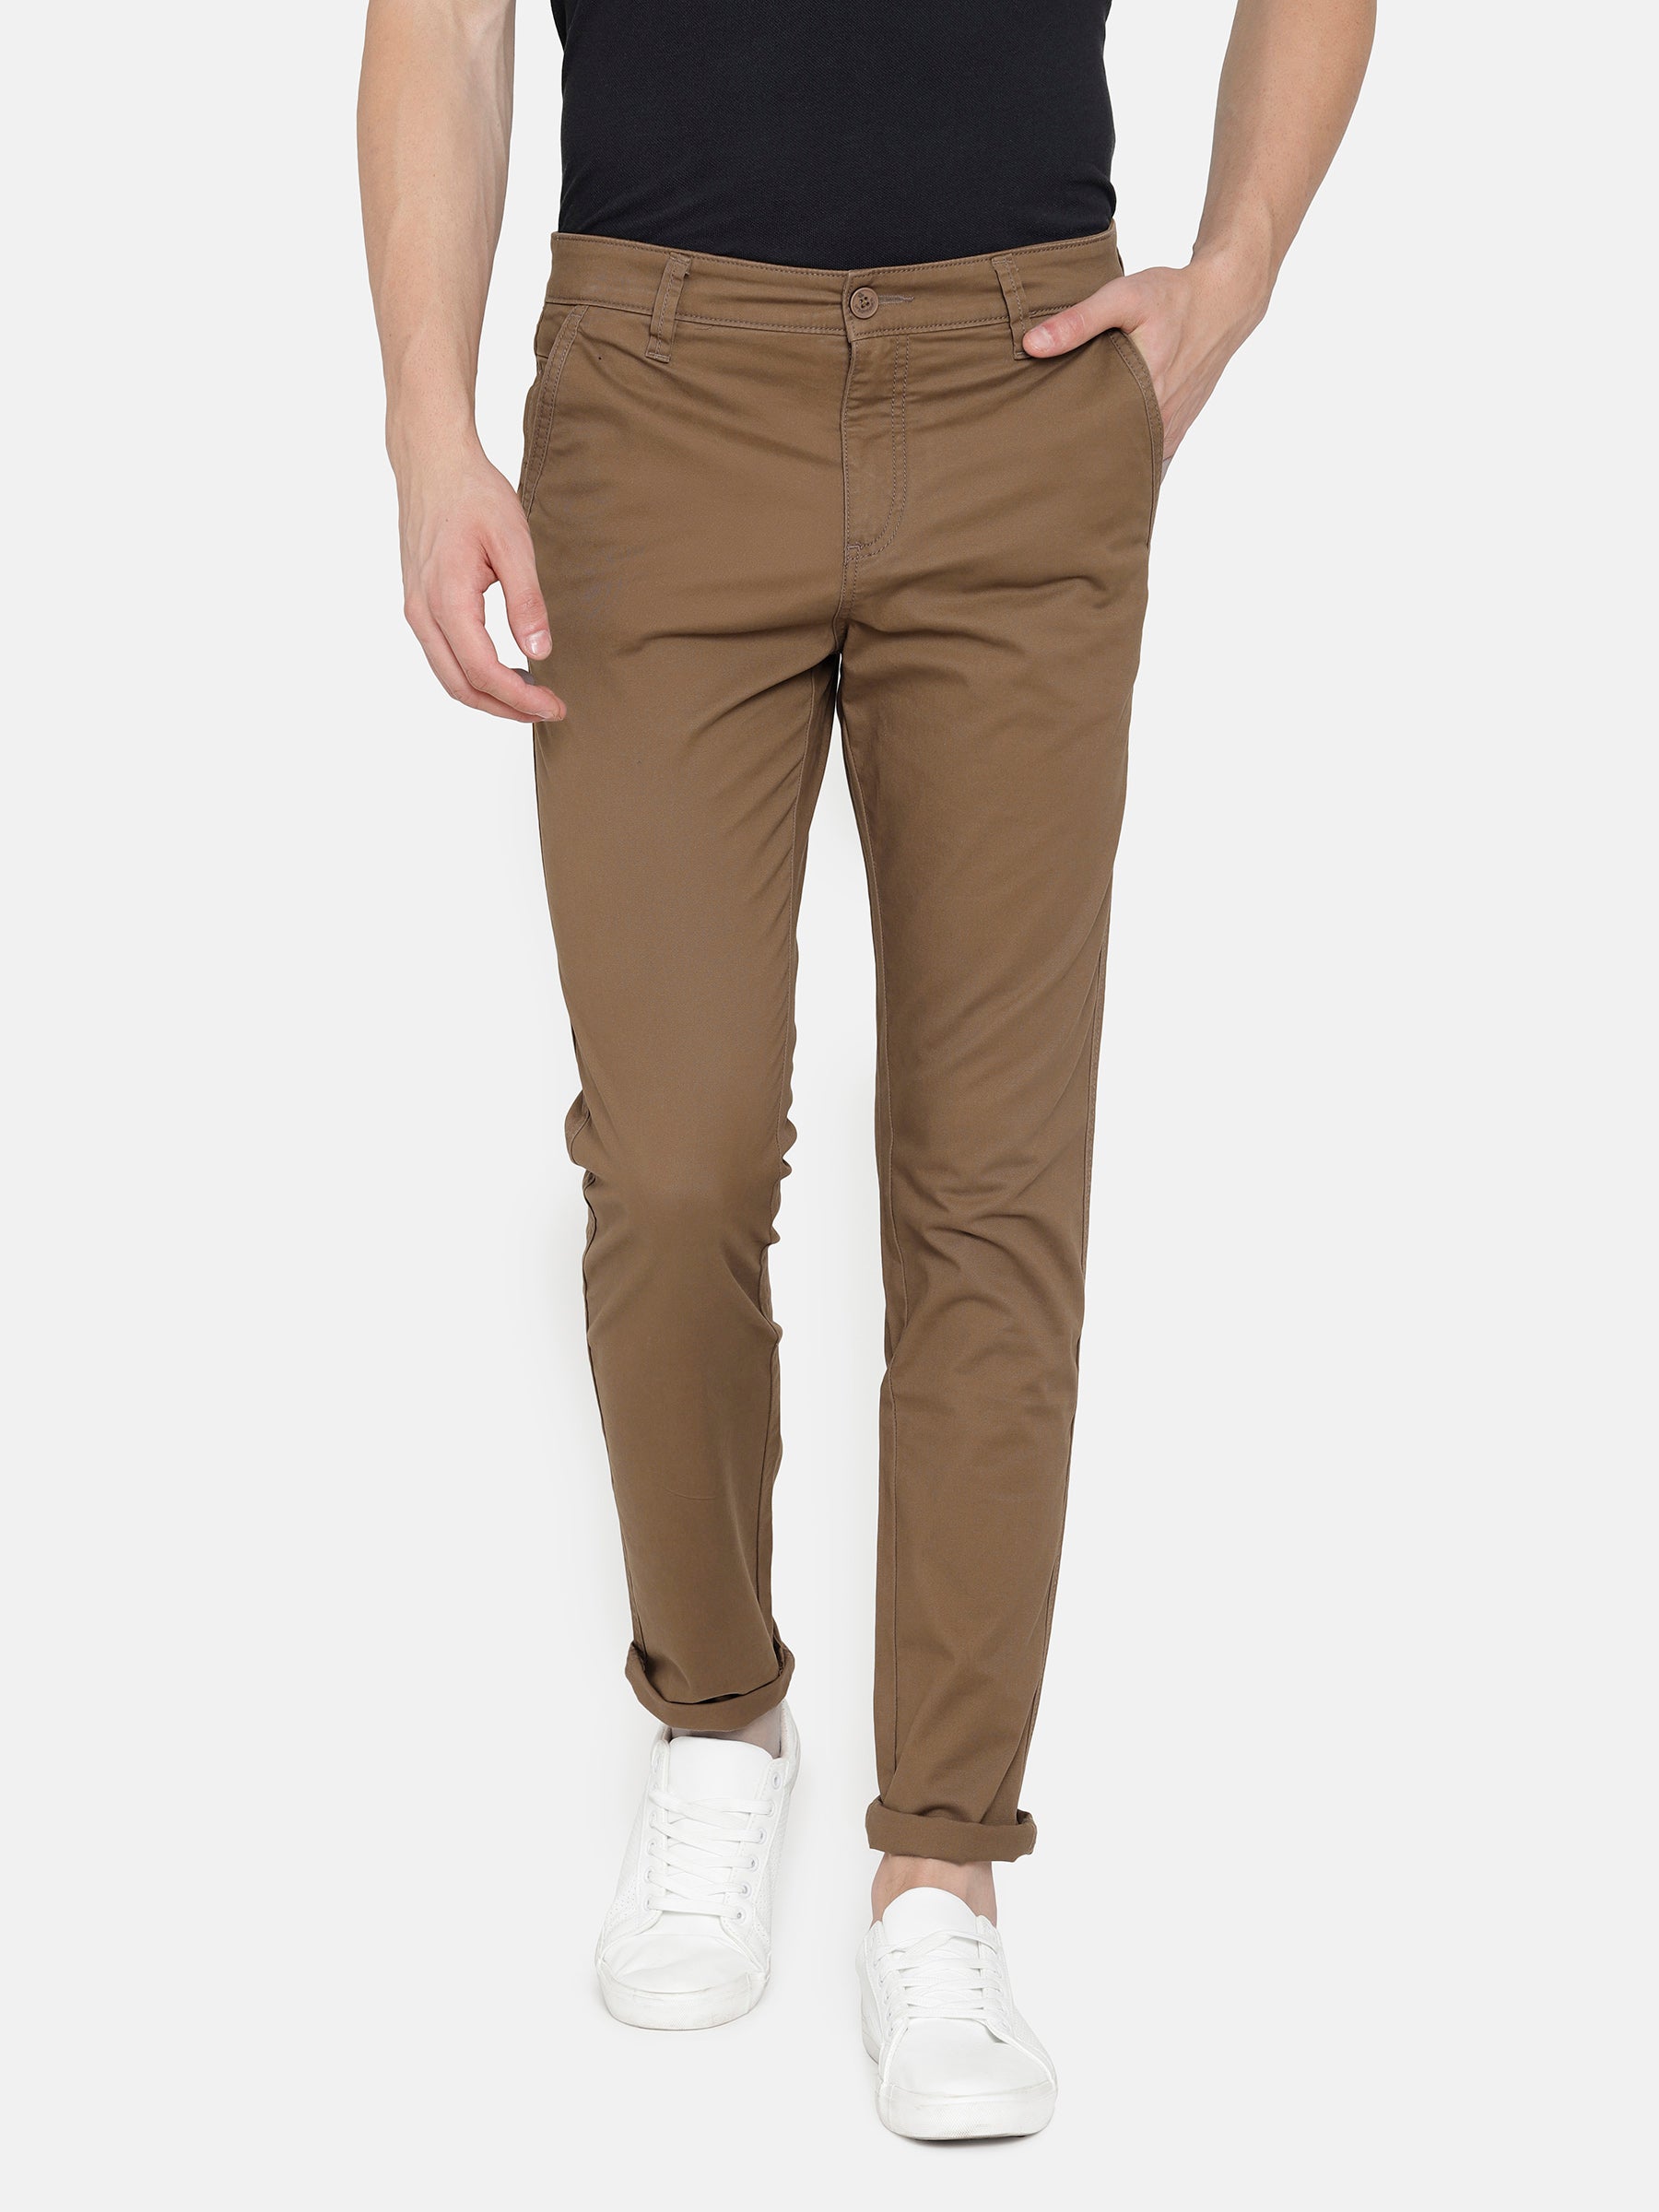 Brown Trousers | Buy Brown Trousers Online in India at Best Price